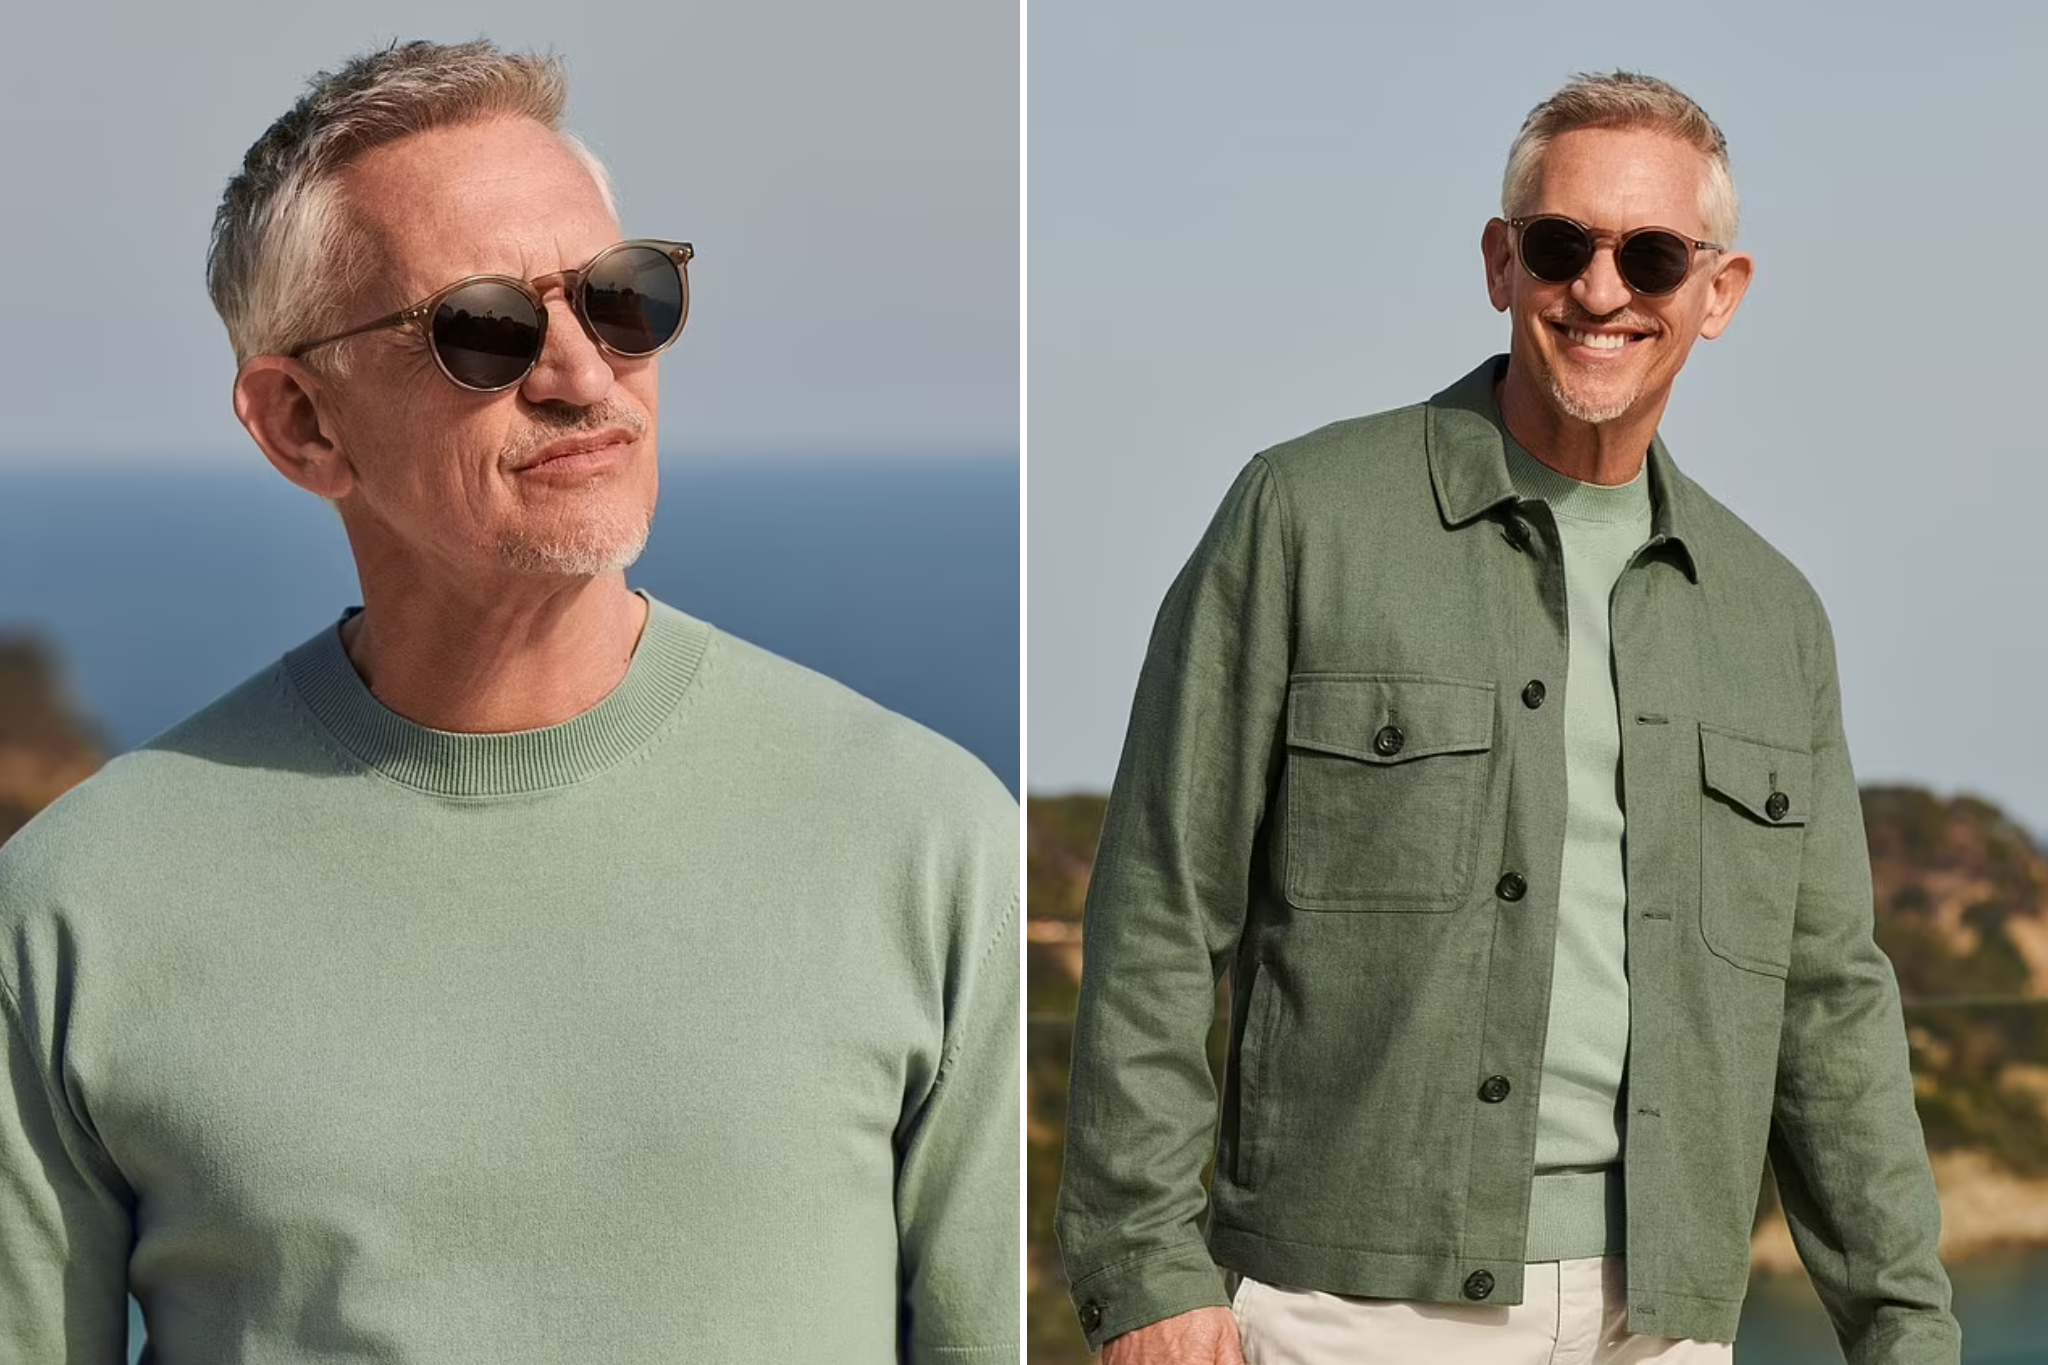 Lineker allegedly wore a green T-shirt and jacket he has modelled for Next live on-air during England’s Euro opener game against Serbia